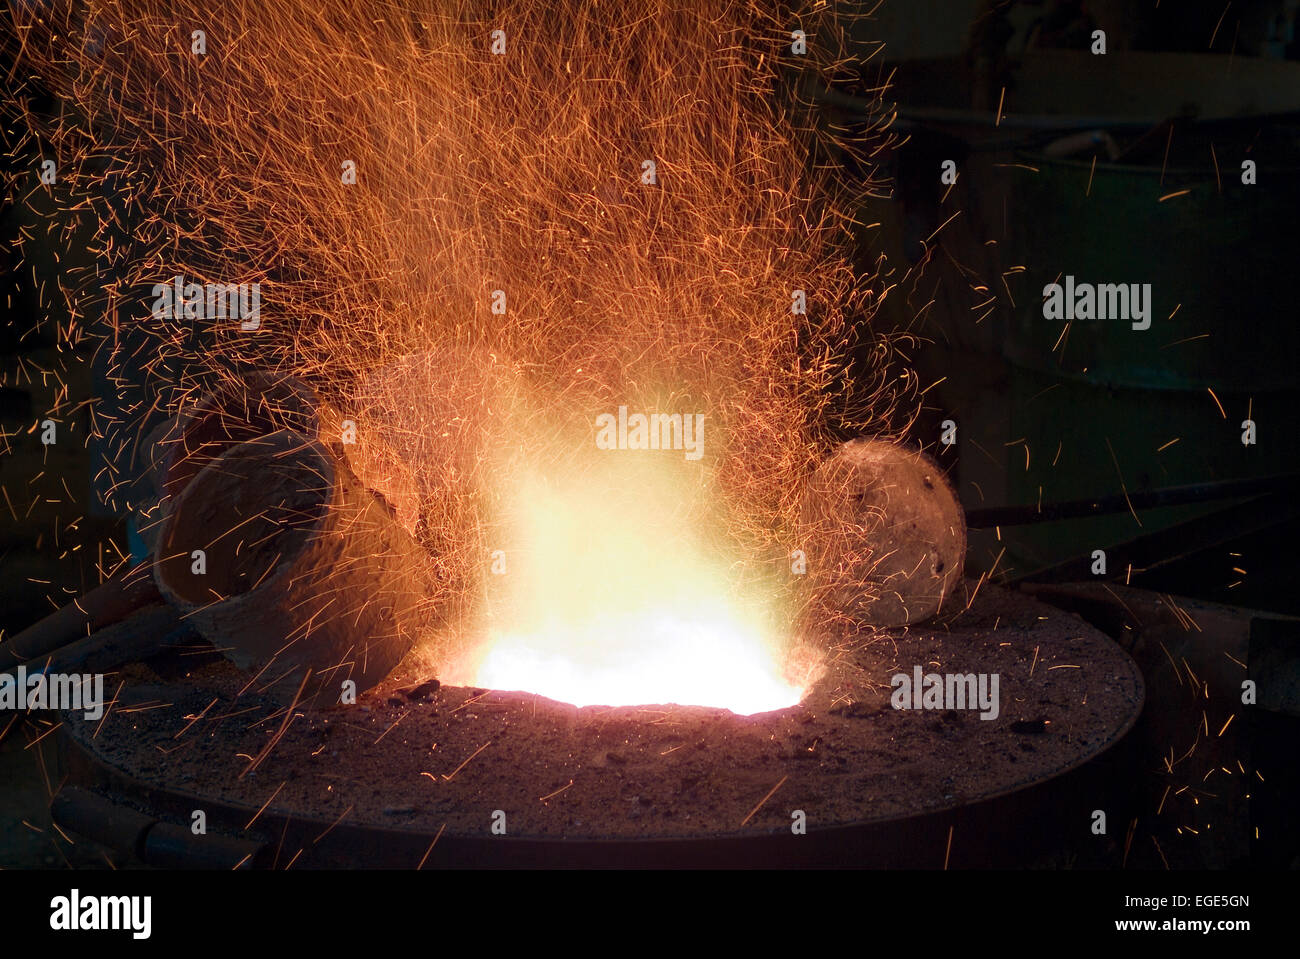 Bronze casting with sparks germany europe Stock Photo